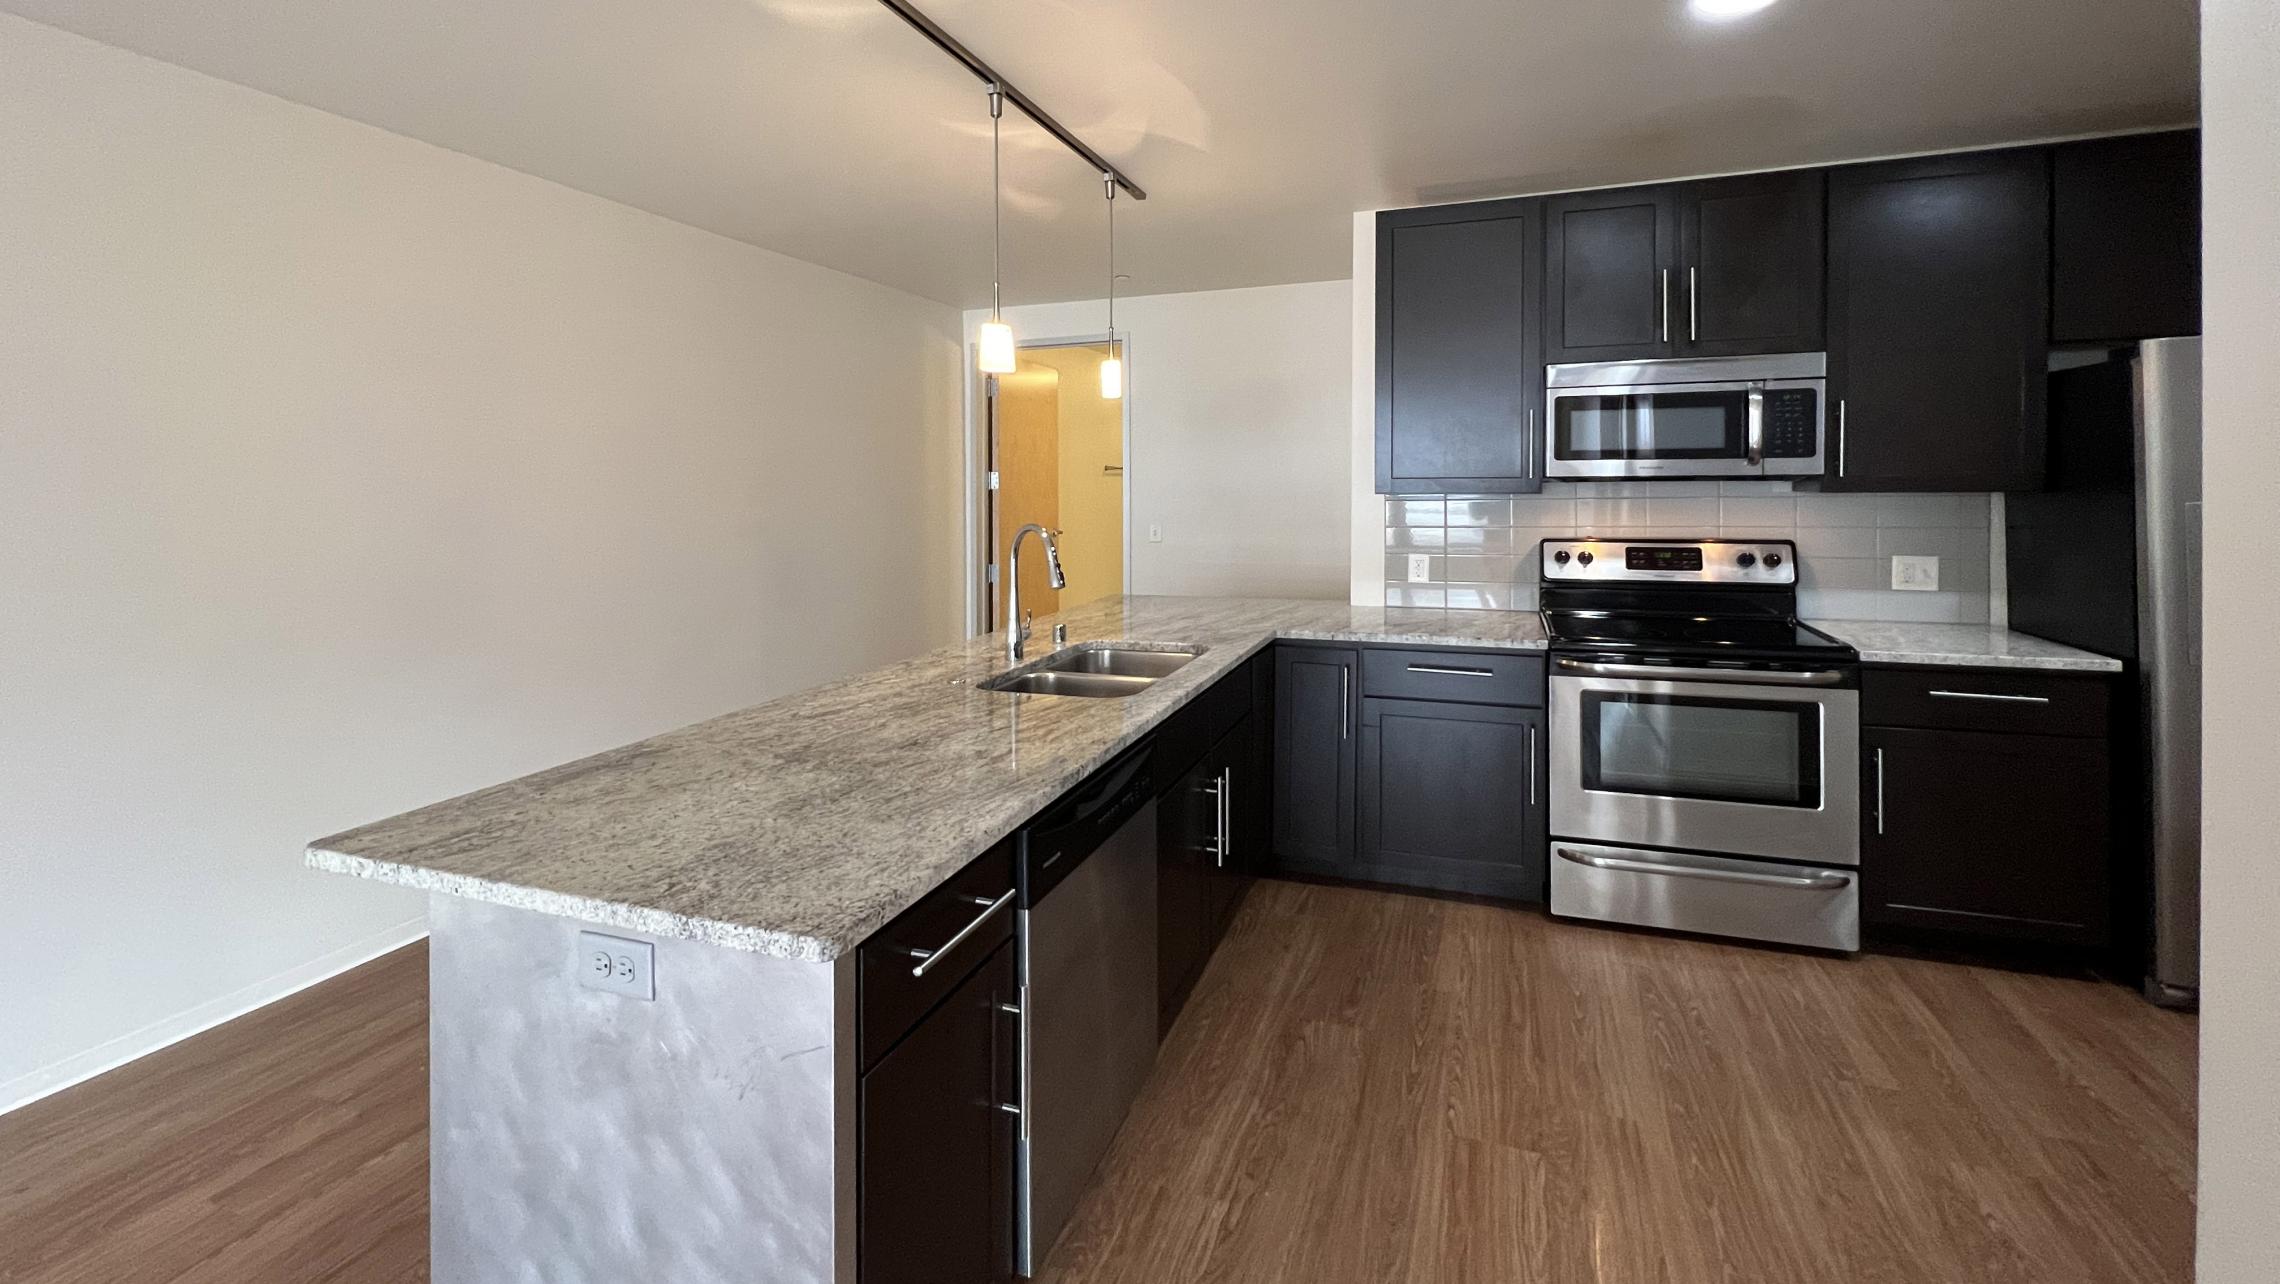 Capitol-Hill-Apartments-206-One-Bedroom-Downtown-Madison-Capitol-Square-Living-Dining-Bathroom-Views-City-Lifestyle-Cats-Modern-Luxury-Design-Laundry-Lake